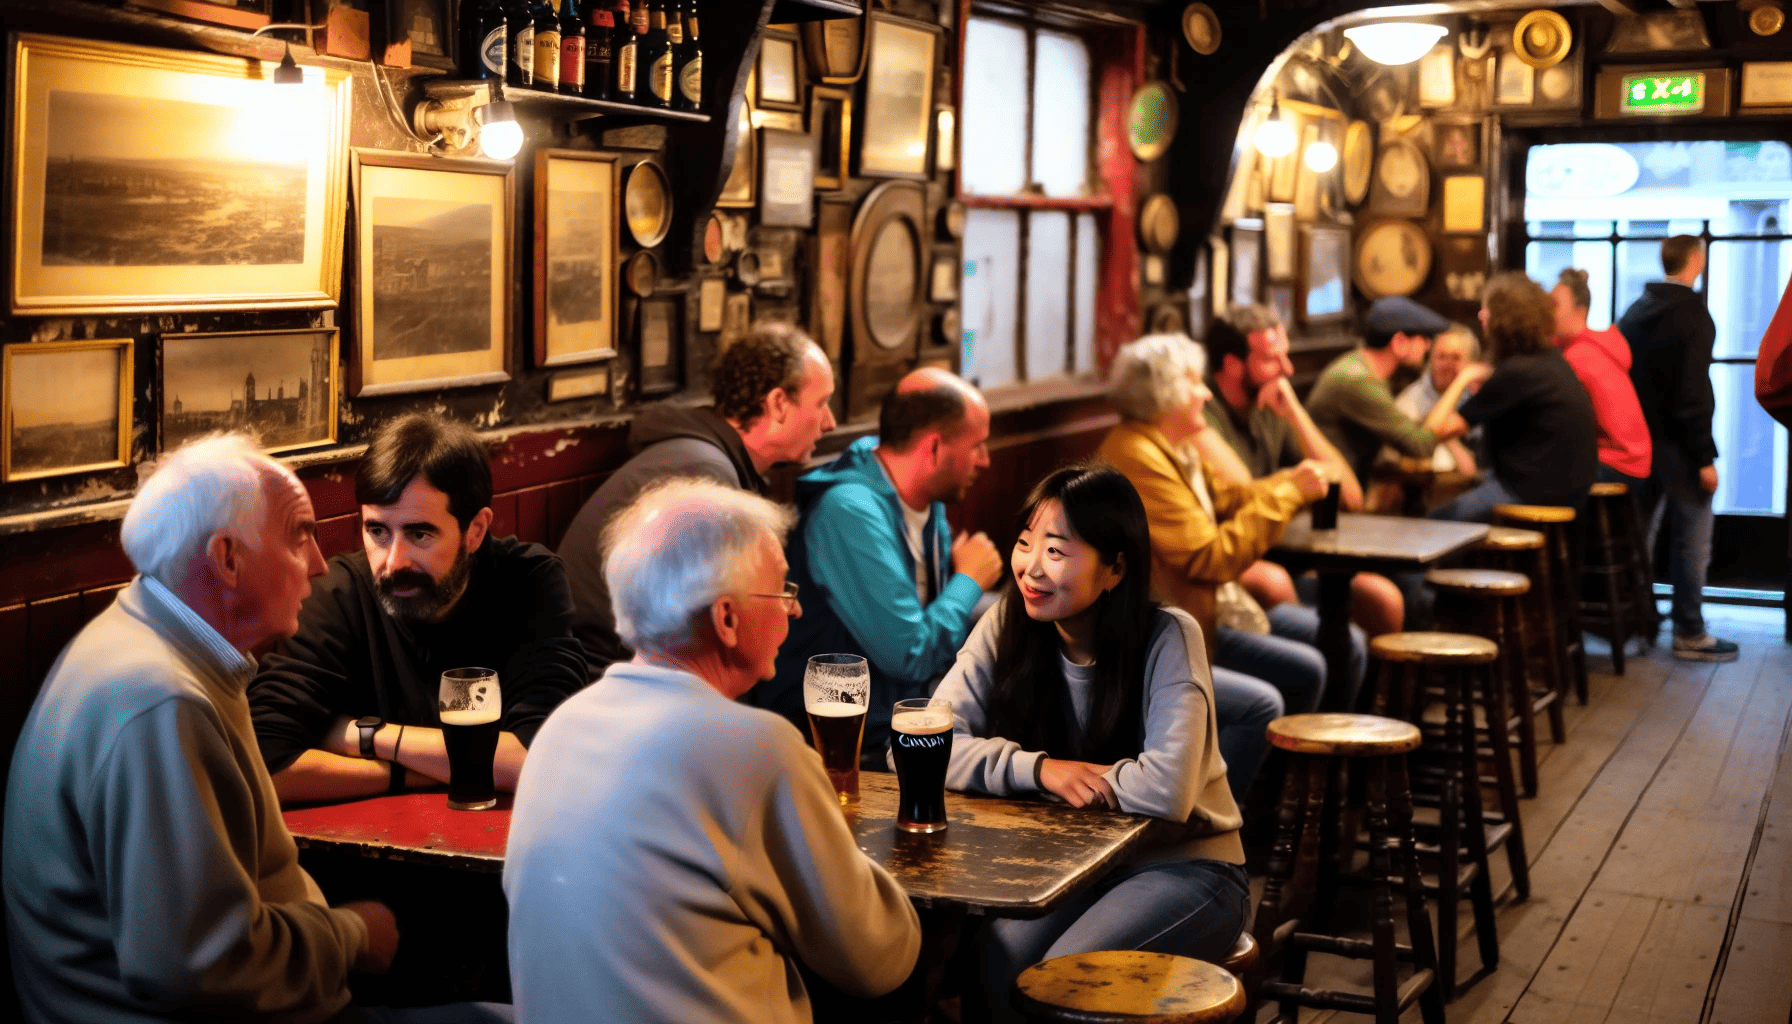 A photo of a traditional Irish pub, a common setting for engaging in banter and slinging slang